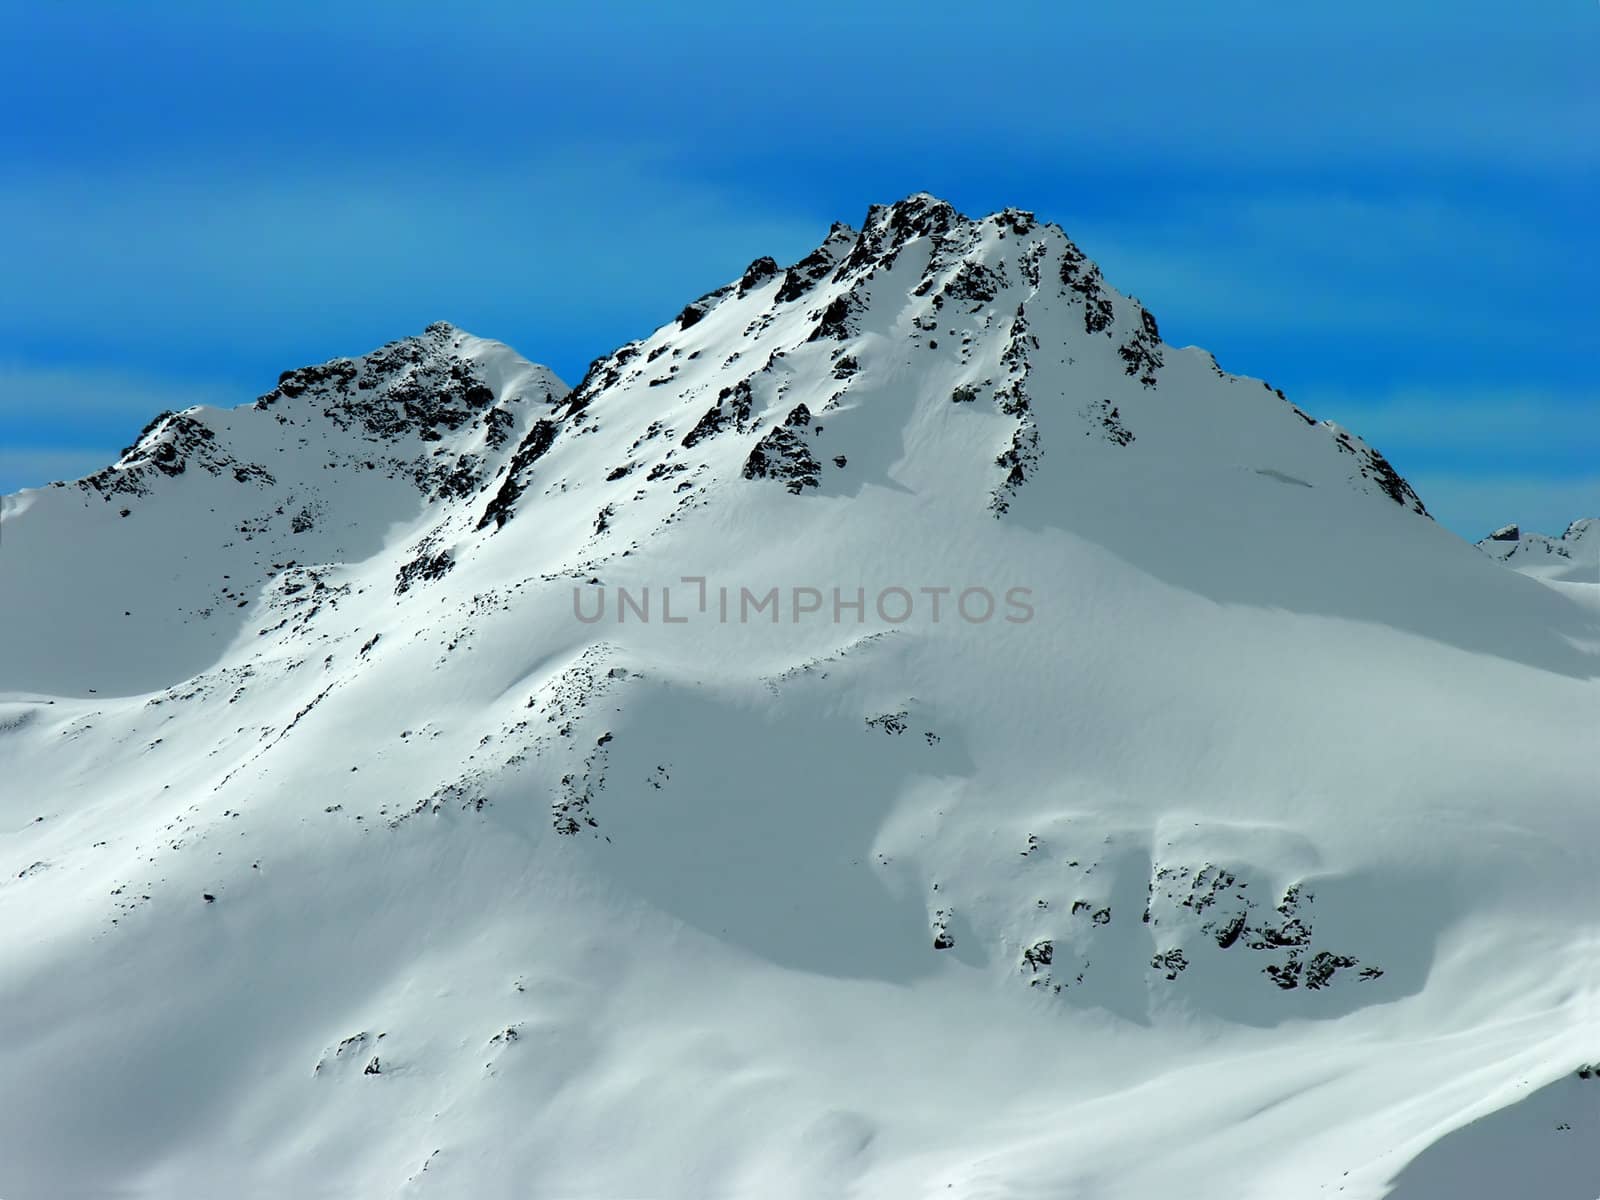 Snow-covered mountain tops on a background of the blue sky.
          